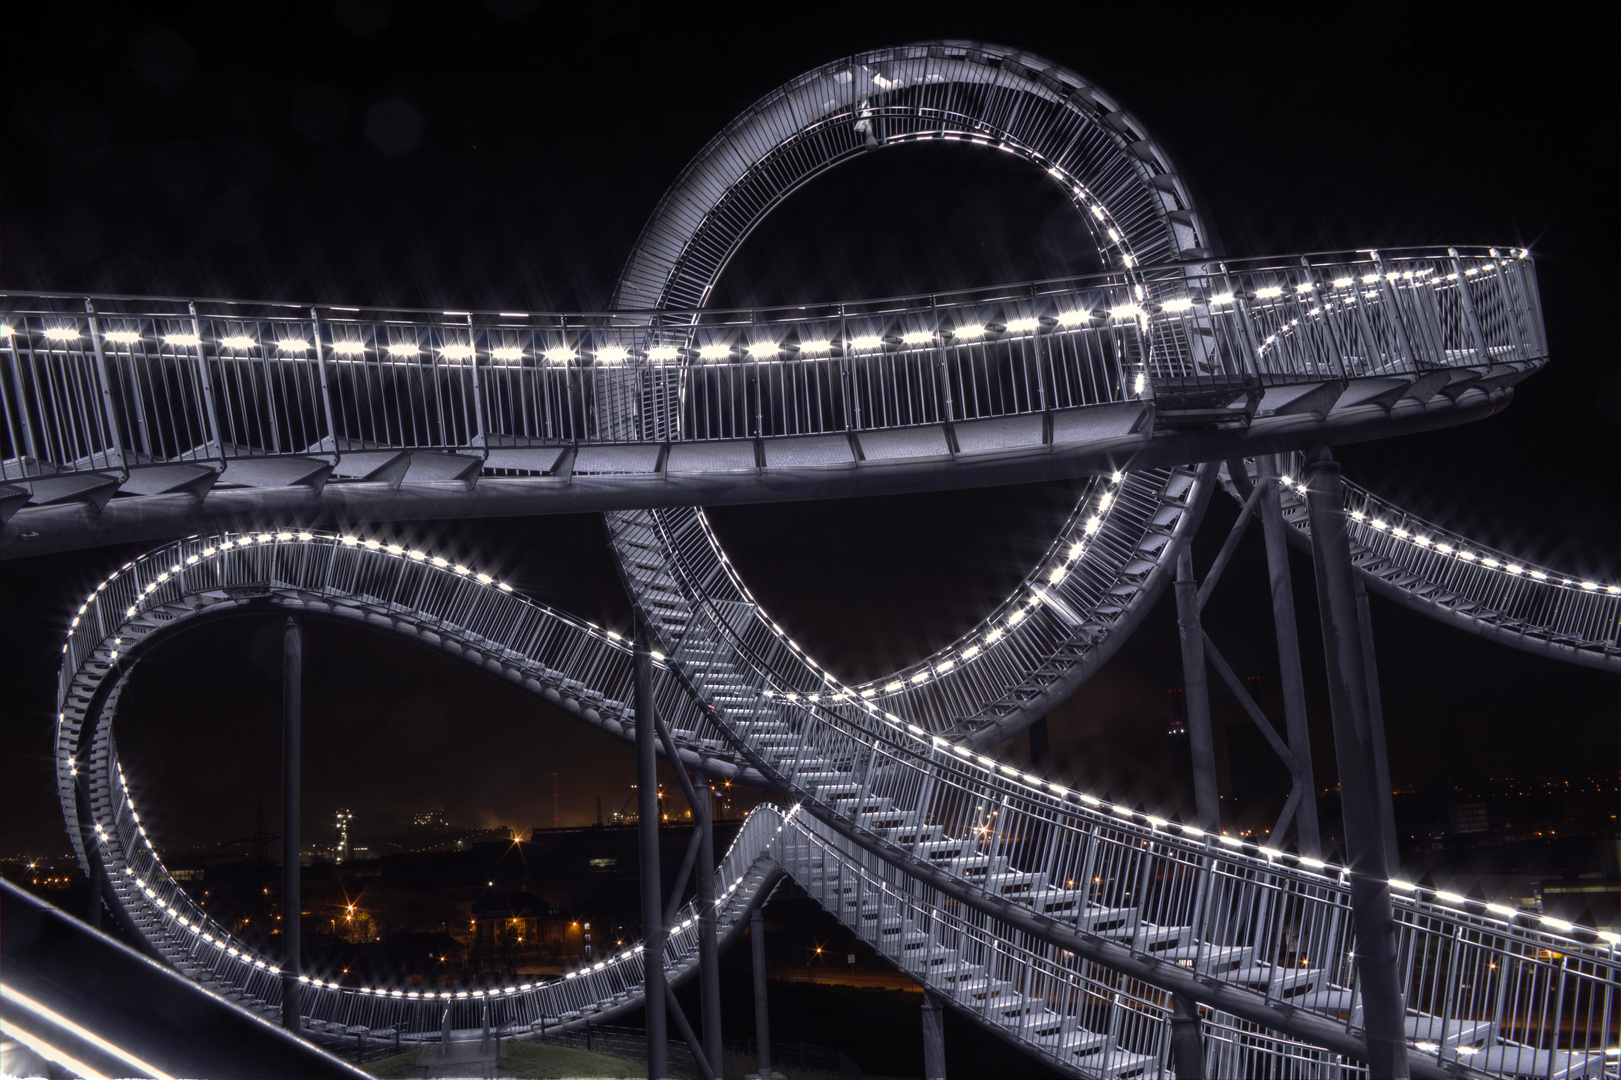 Tiger and Turtle – The Magic Mountain 2